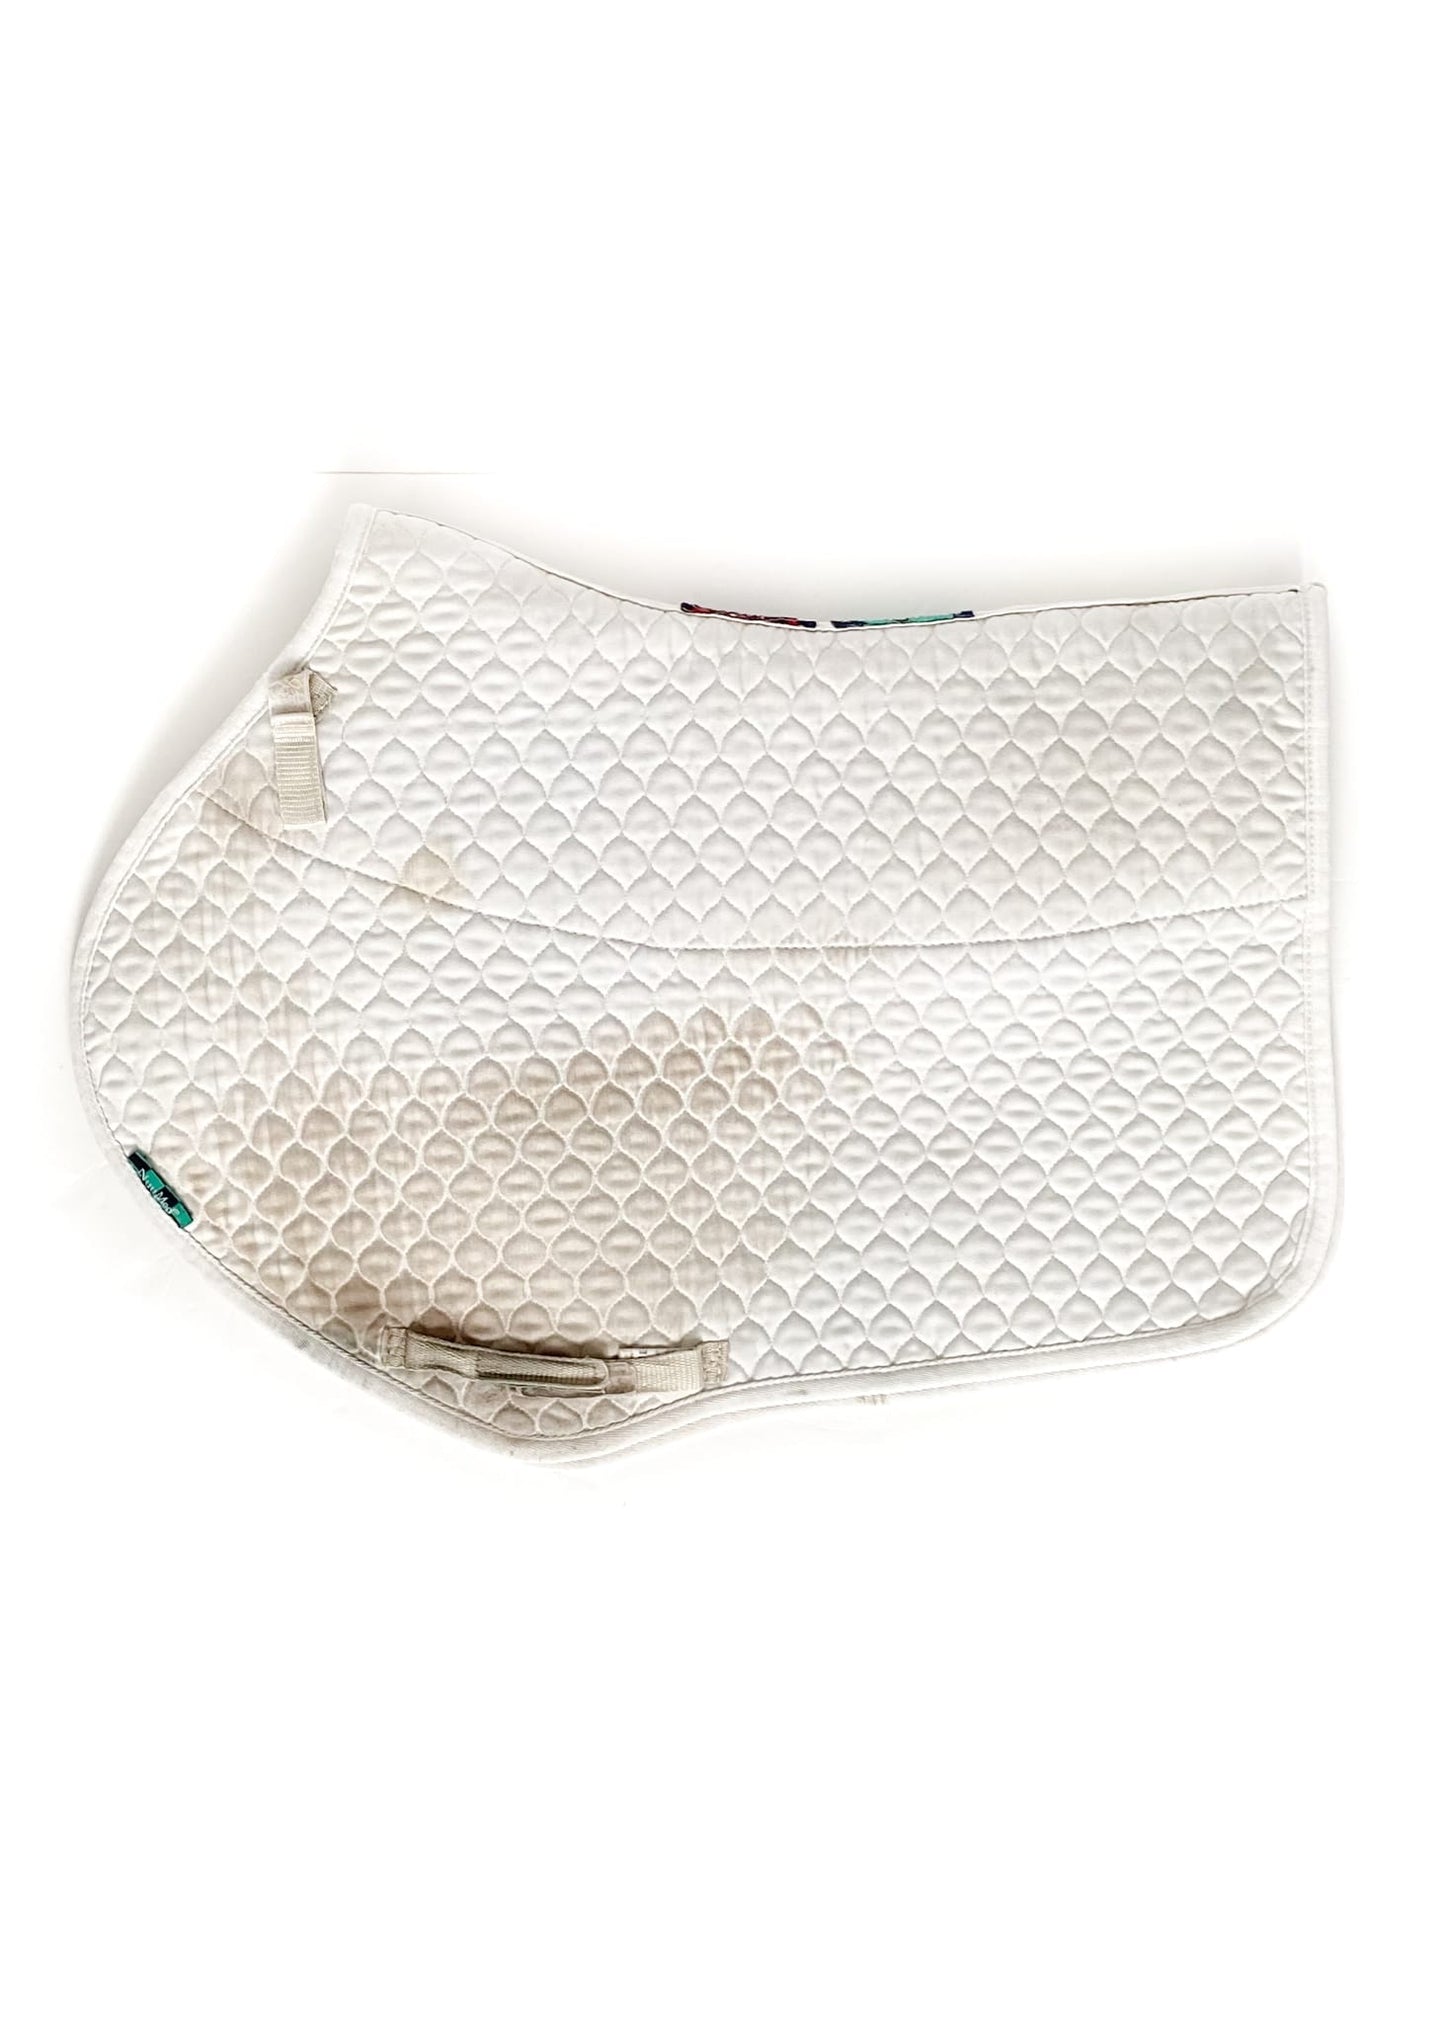 Nuumed HiWither Wool Close Contact Saddle Pad - White - Medium (16" - 17")